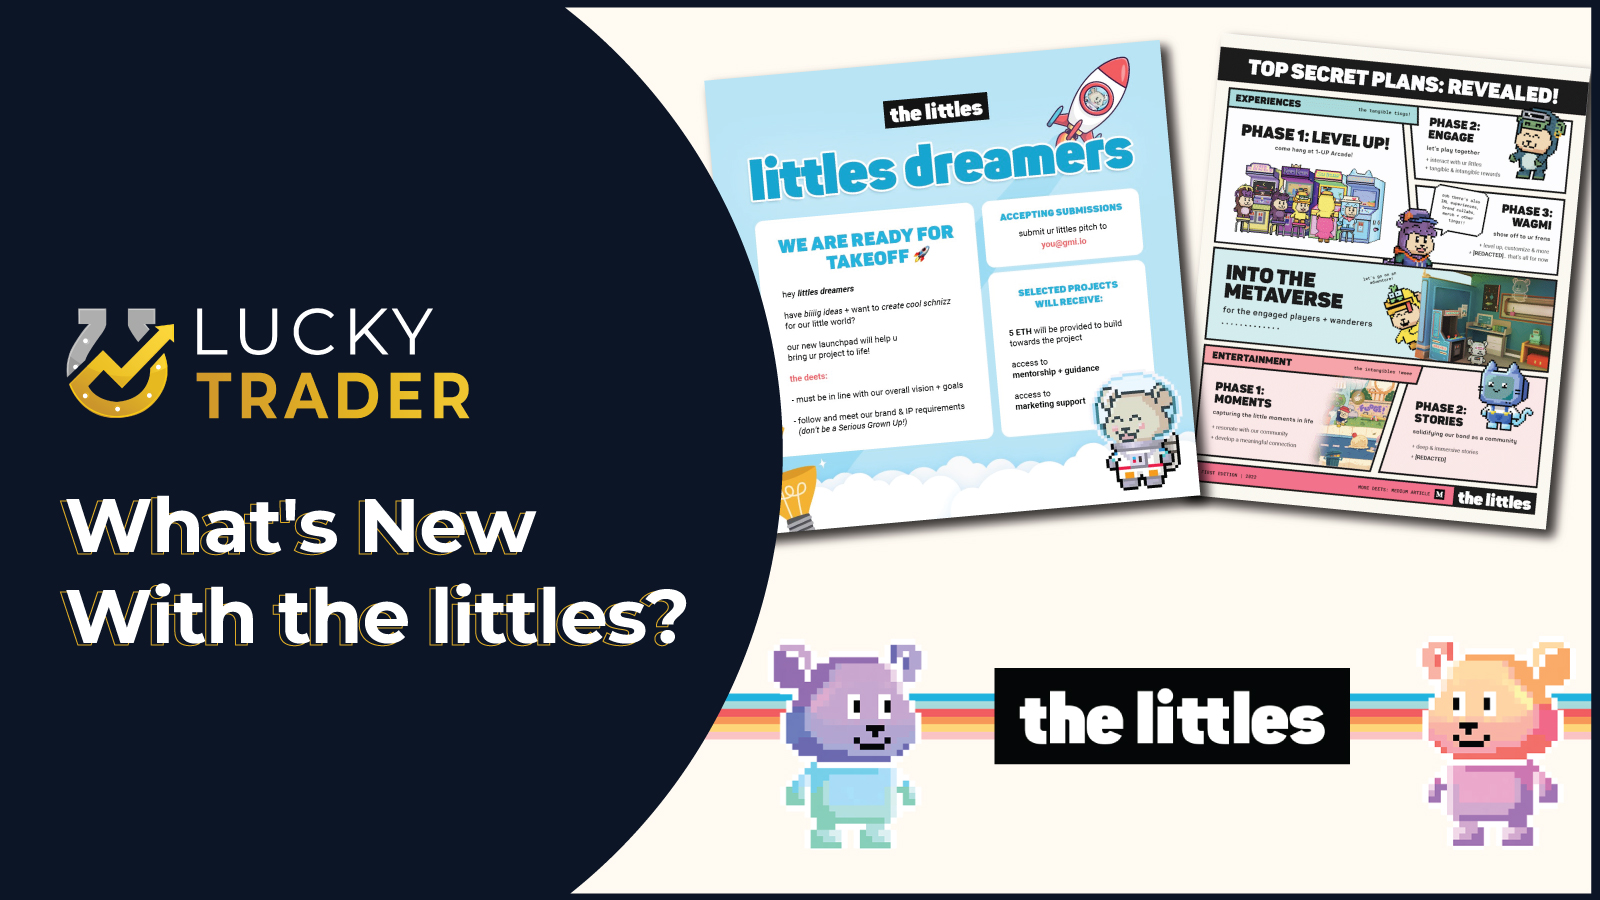 What's New With the littles NFT?